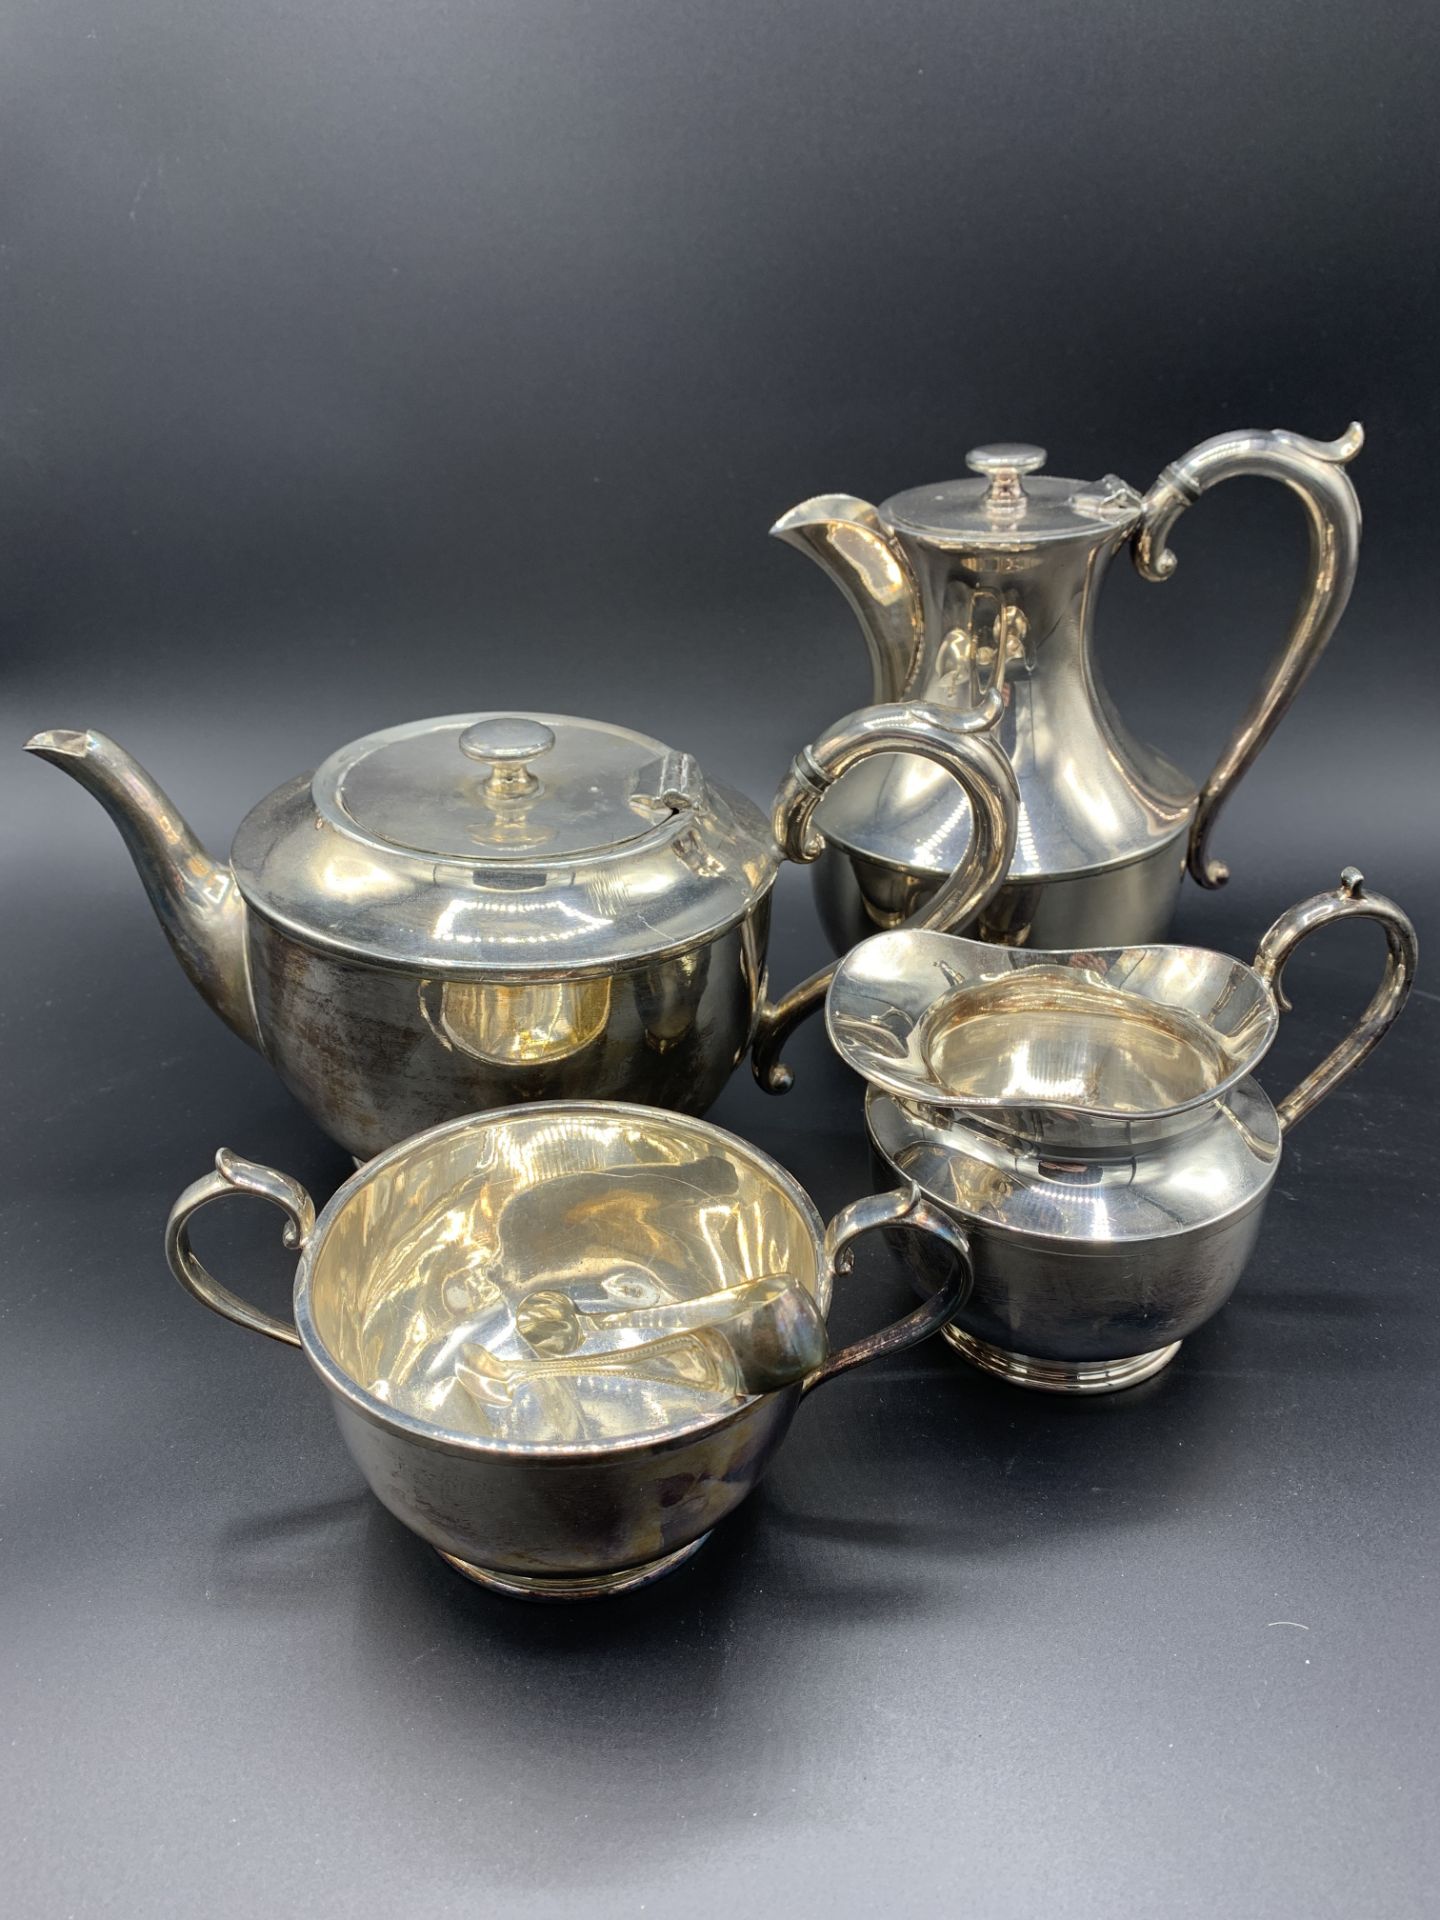 Silver plate tea service by James Dixon & Sons - Image 3 of 3